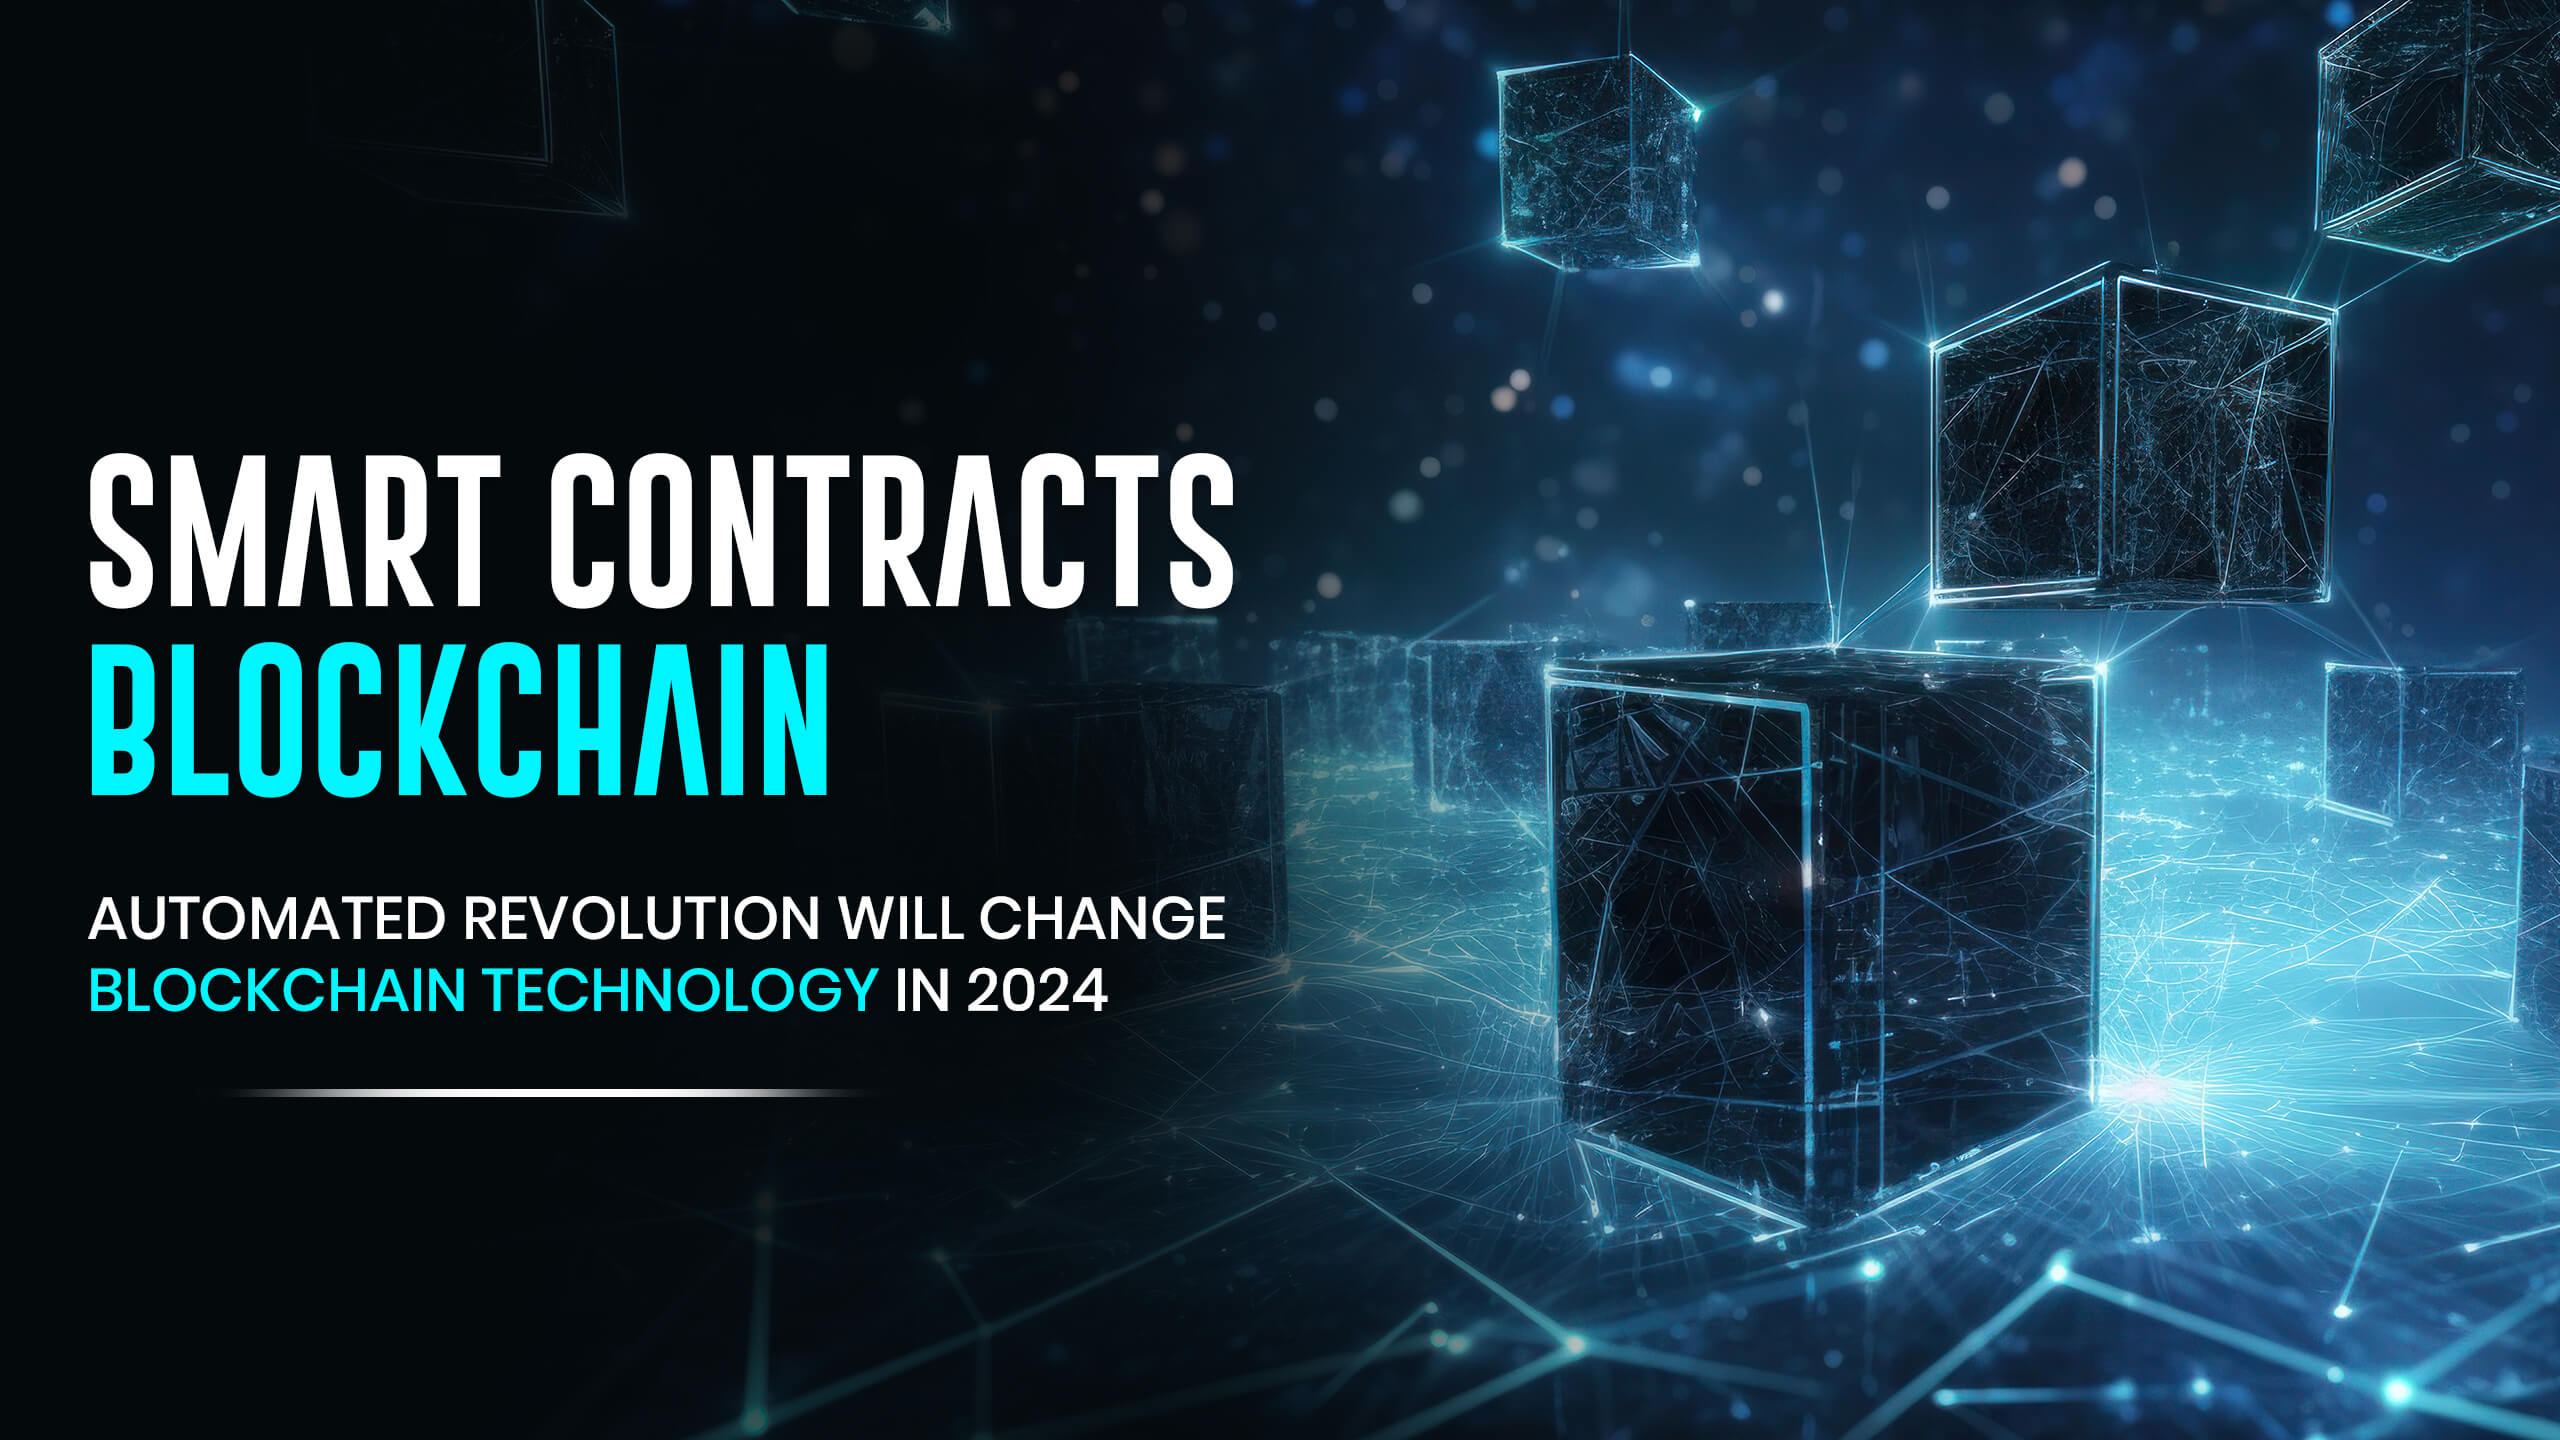 Smart Contracts Blockchain The Automated Revolution That Will Change Blockchain Technology